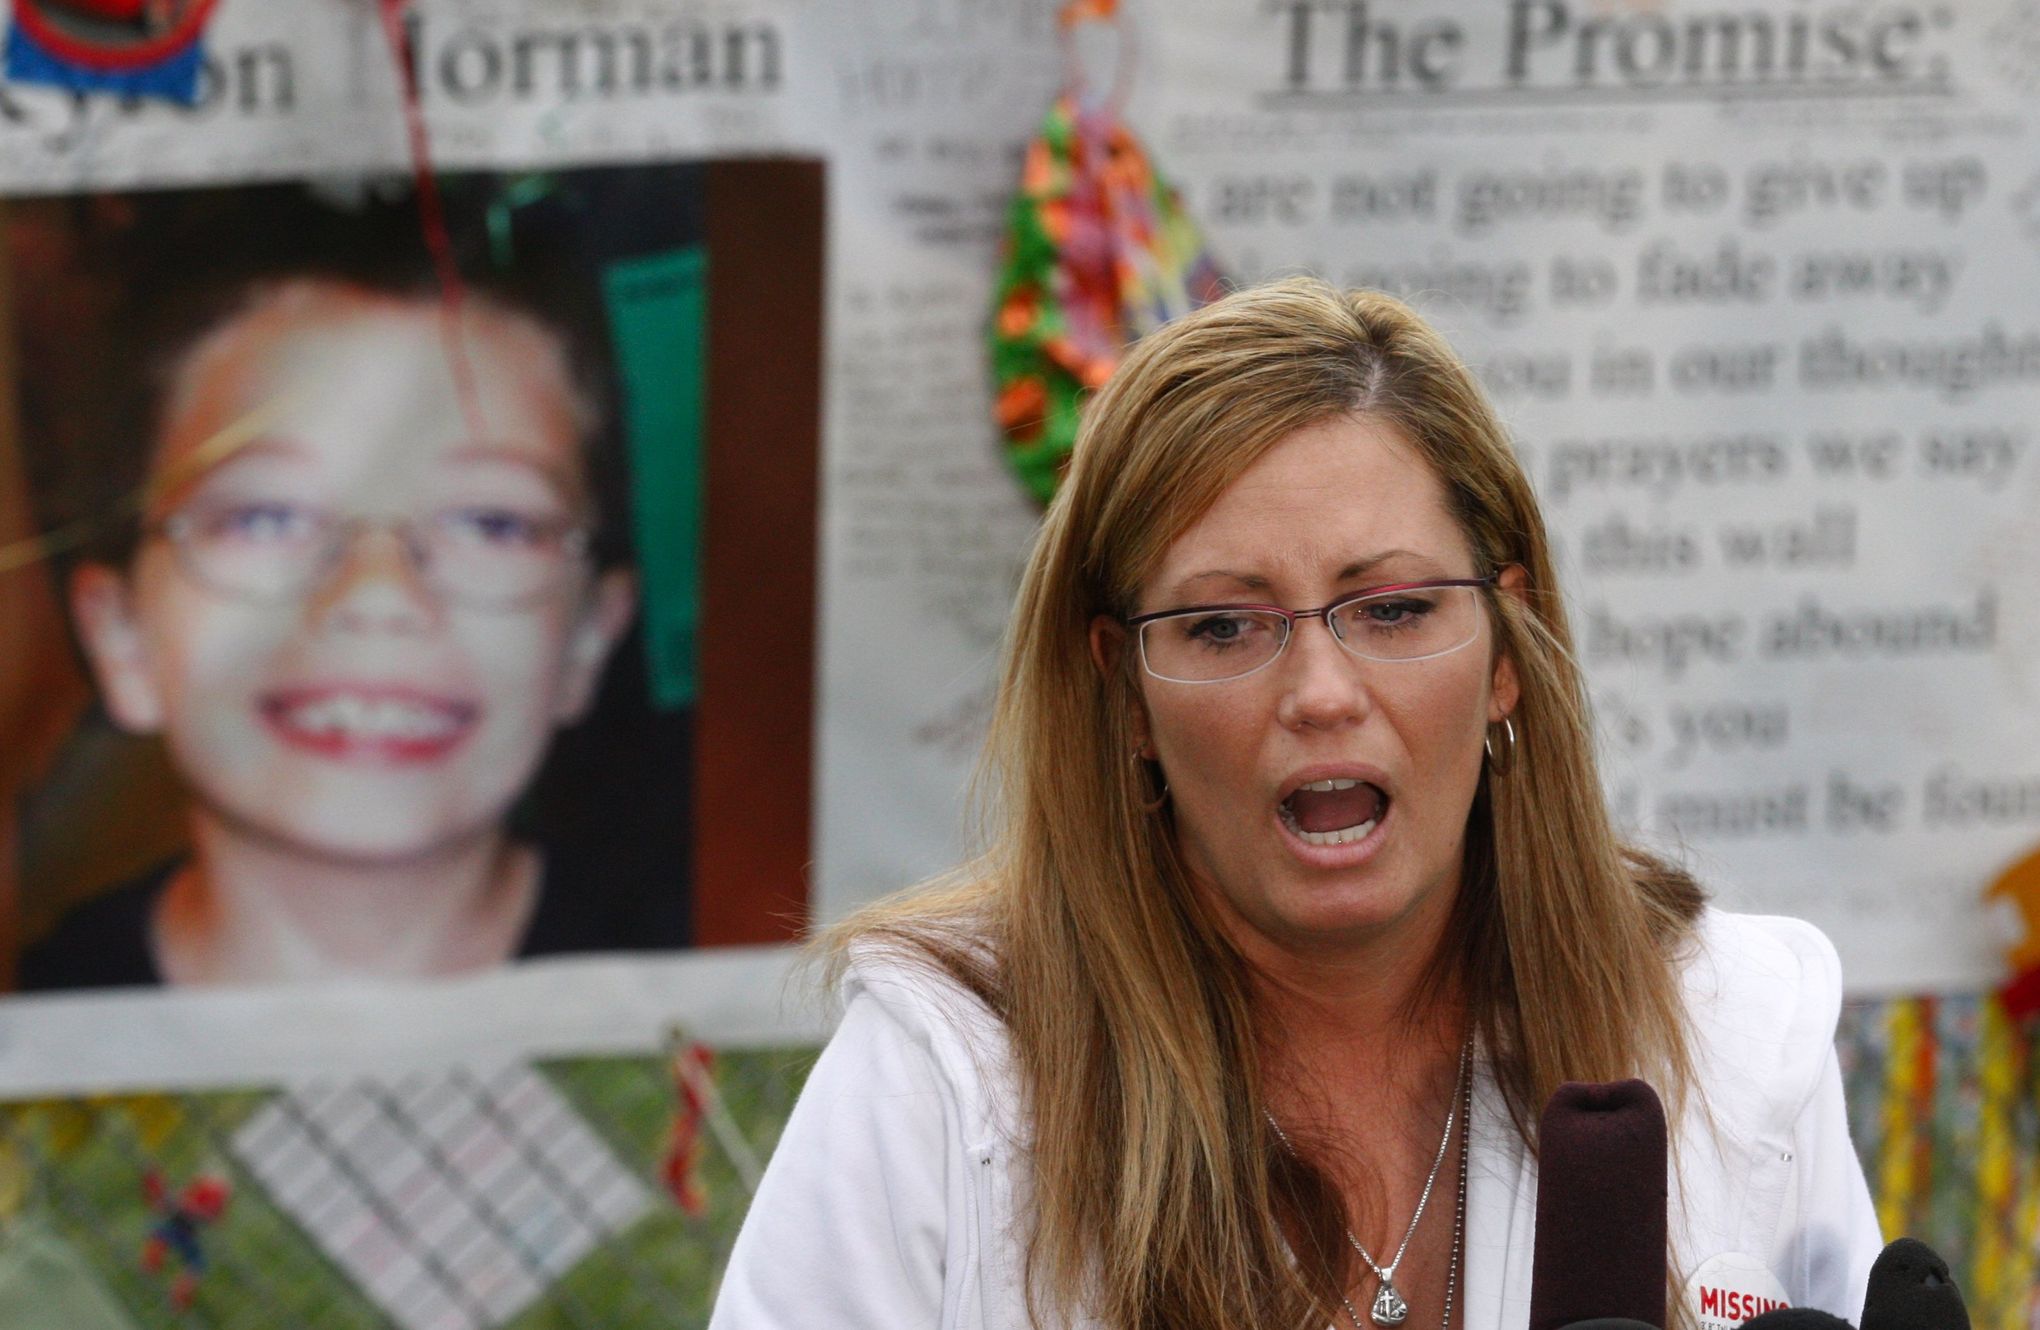 Oregon mother of missing boy: 'It doesn't get easier with time